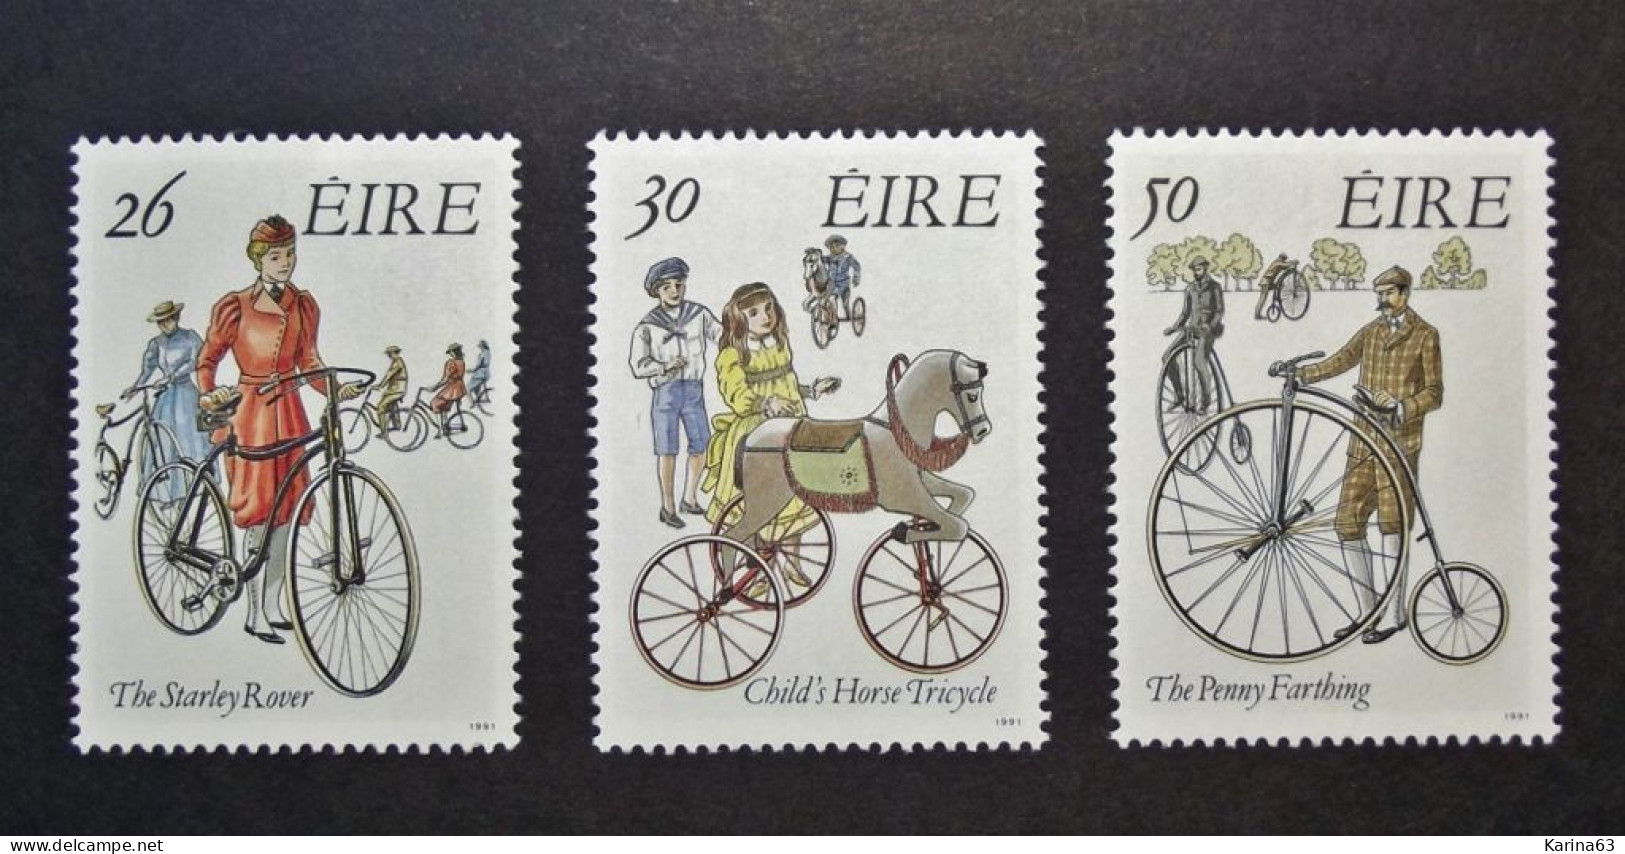 Ireland - Irelande - Eire - 1991 Y&T N° 749 / 751 ( 3 Val.) - Transport - The Bicycle - Fiets - History - MNH - Postfris - Neufs